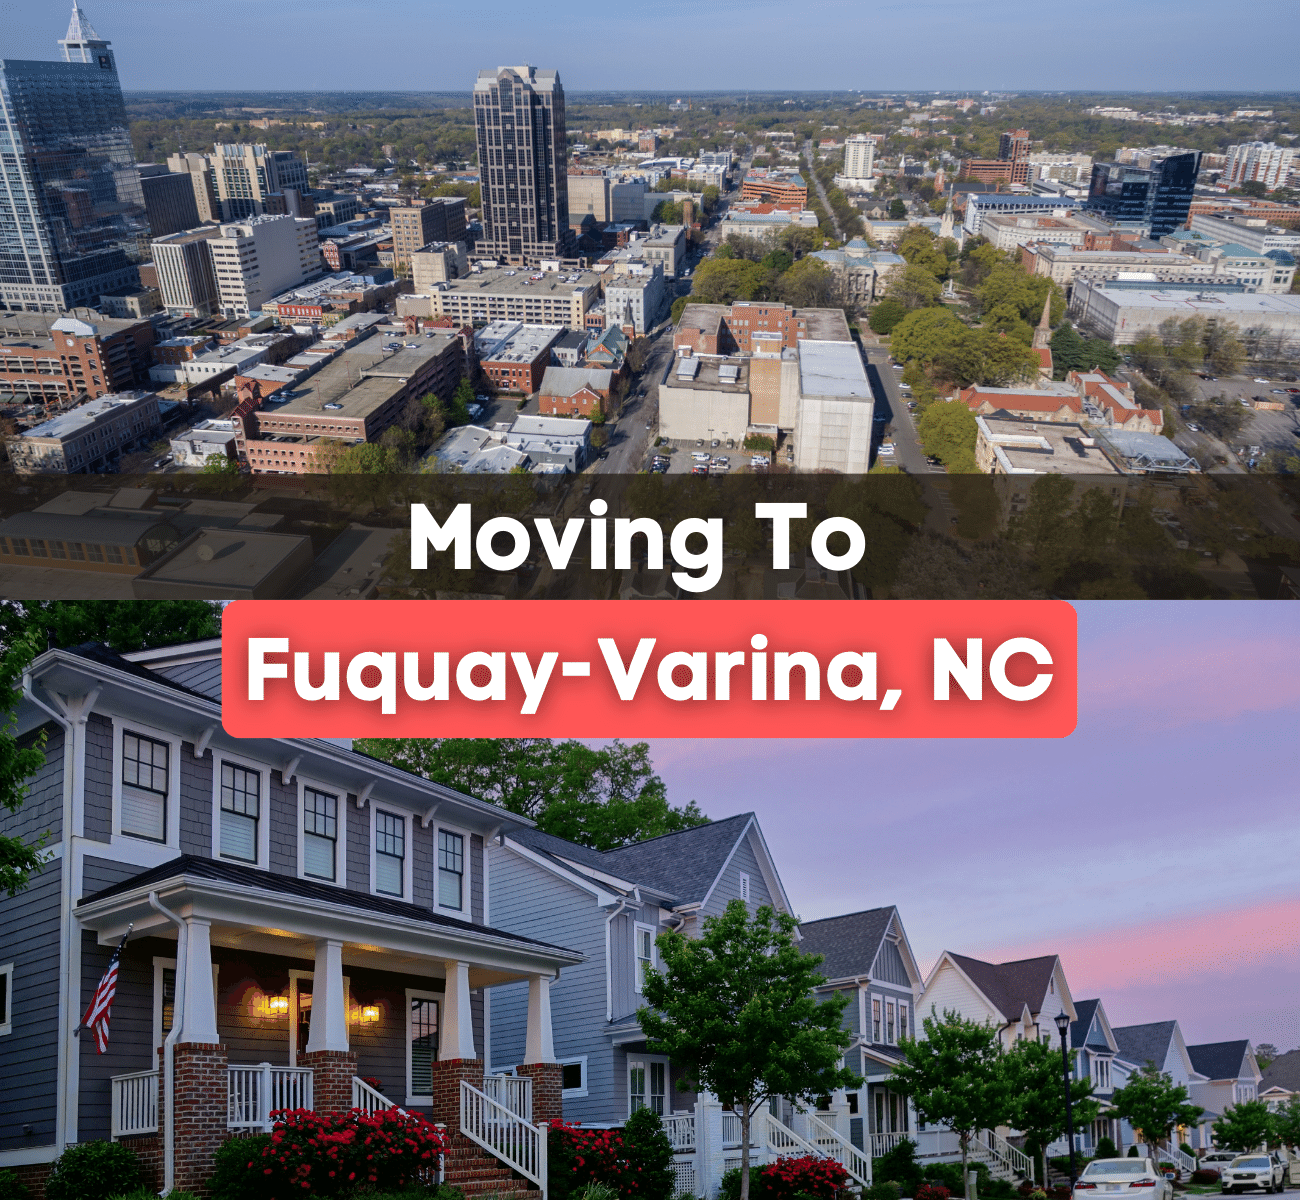 5 Things You Should Know BEFORE Moving to Fuquay-Varina, NC (2023)